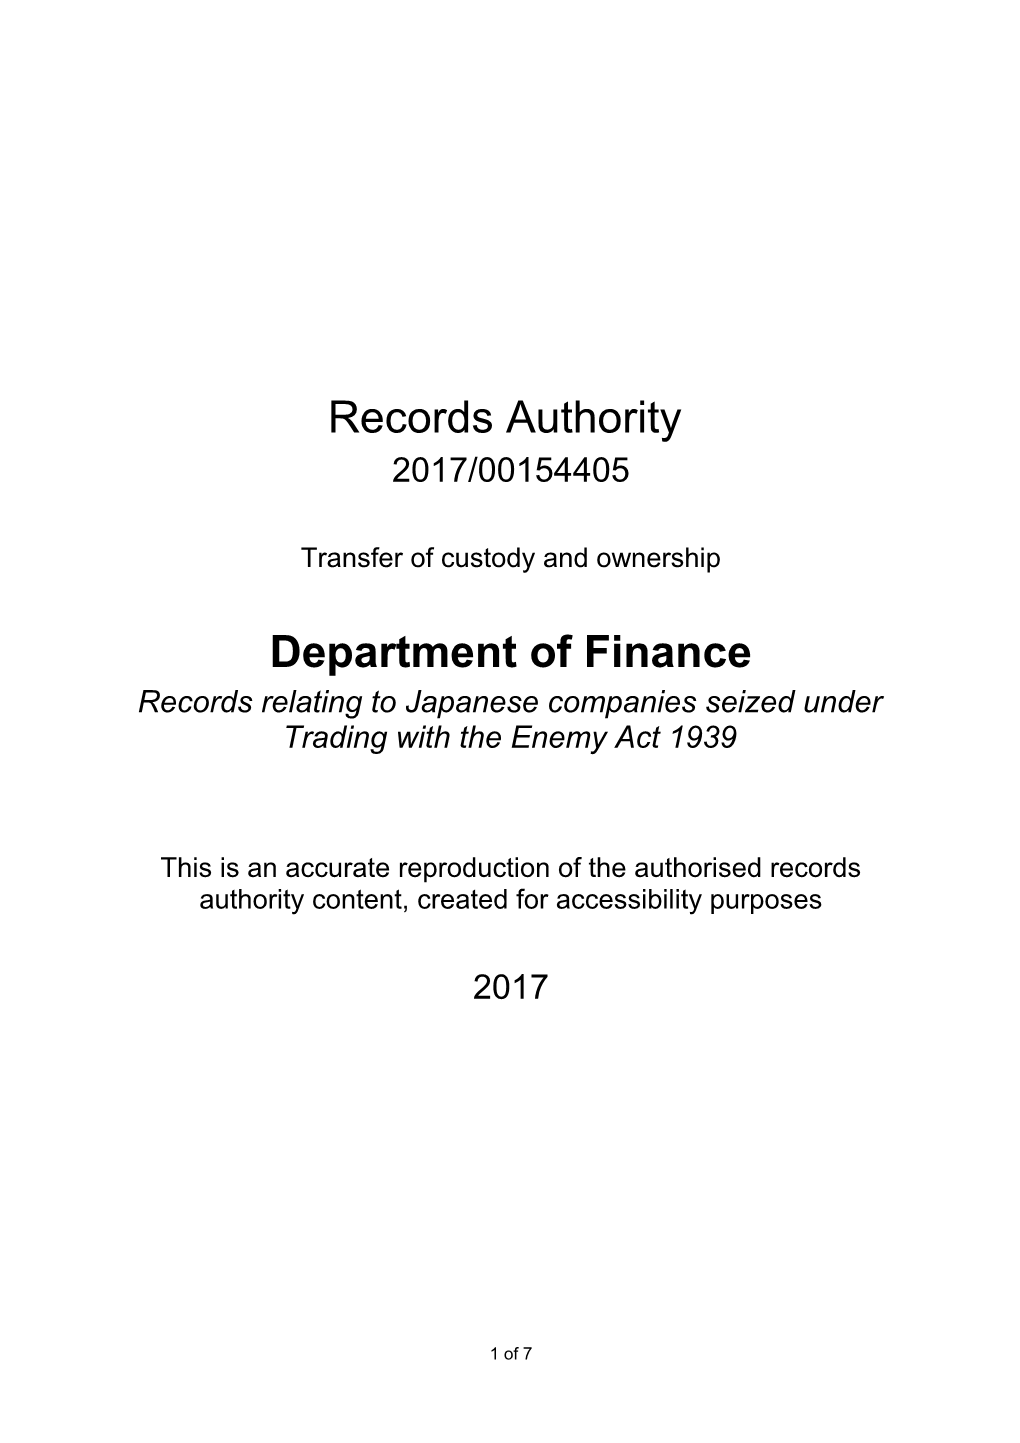 Department of Finance - Records Authority - 2017/00154405